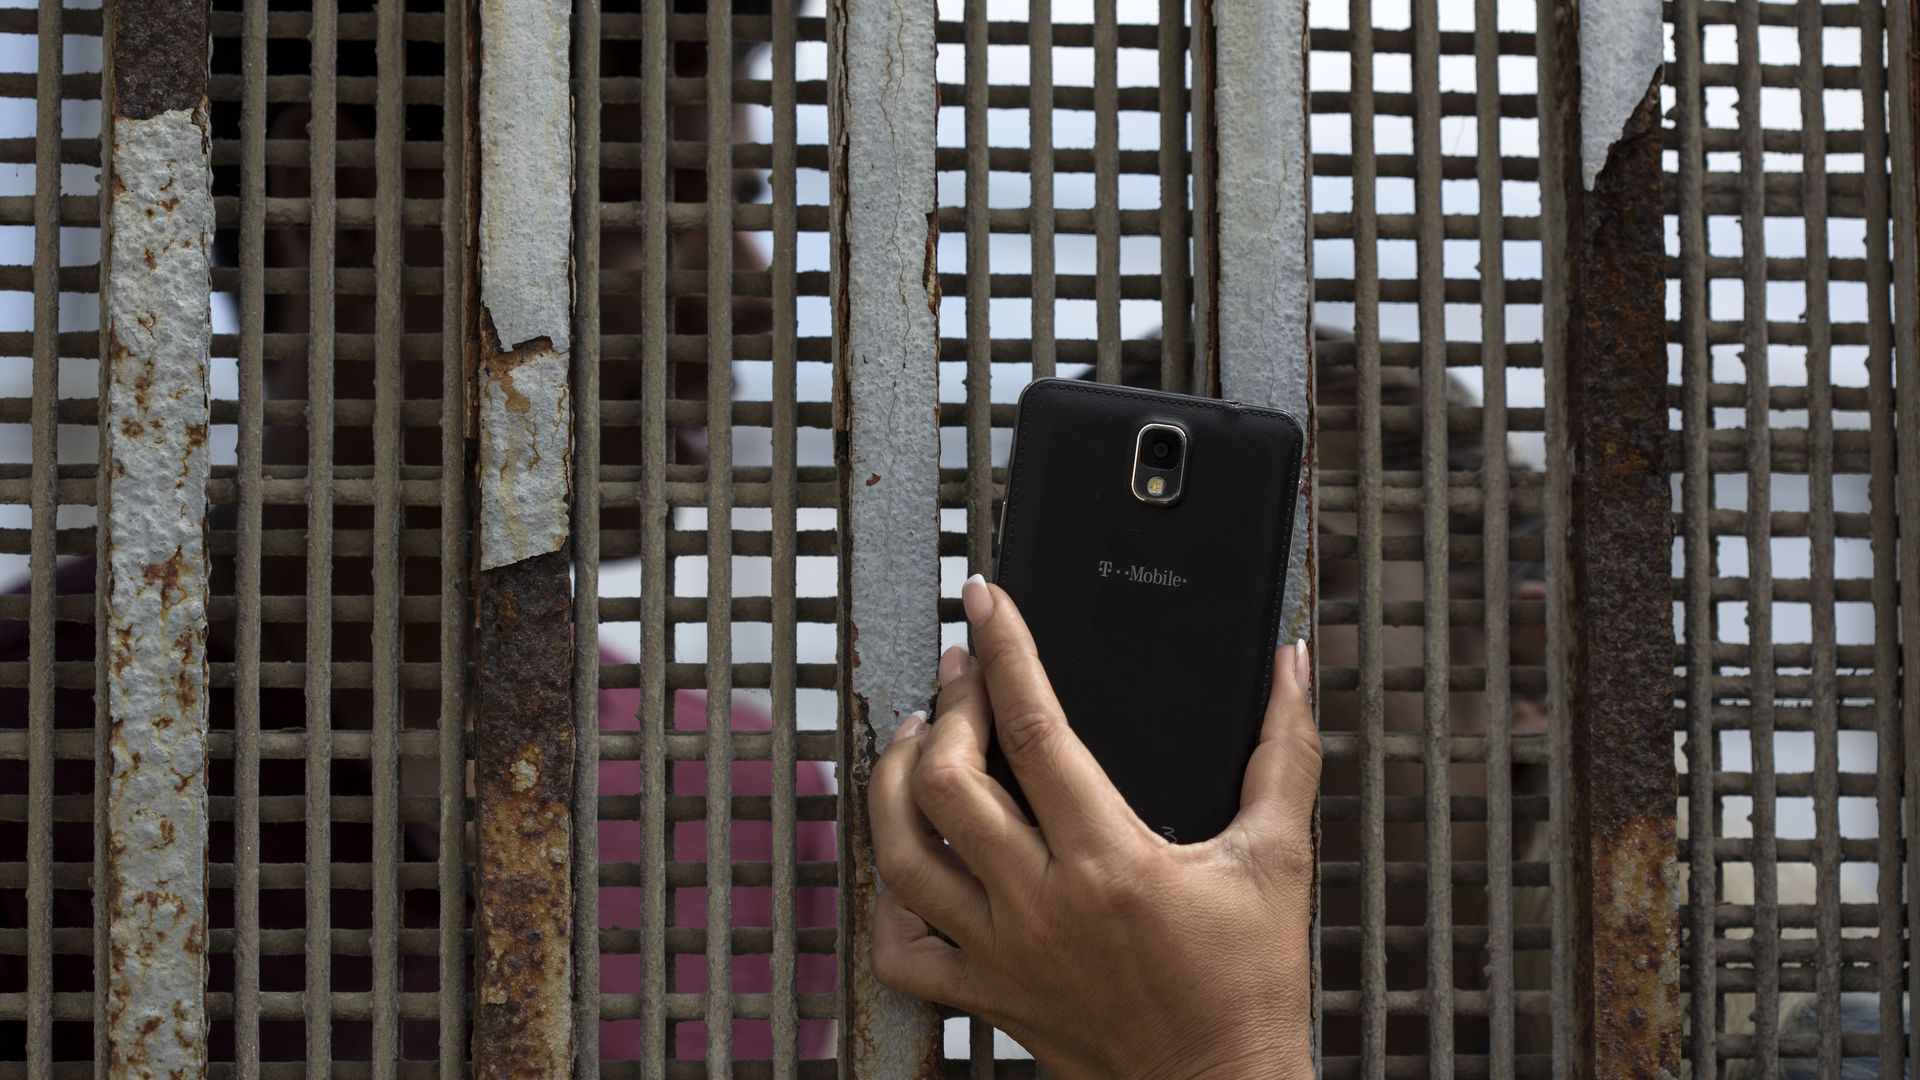 A hand holds a phone up to a grated border wall.